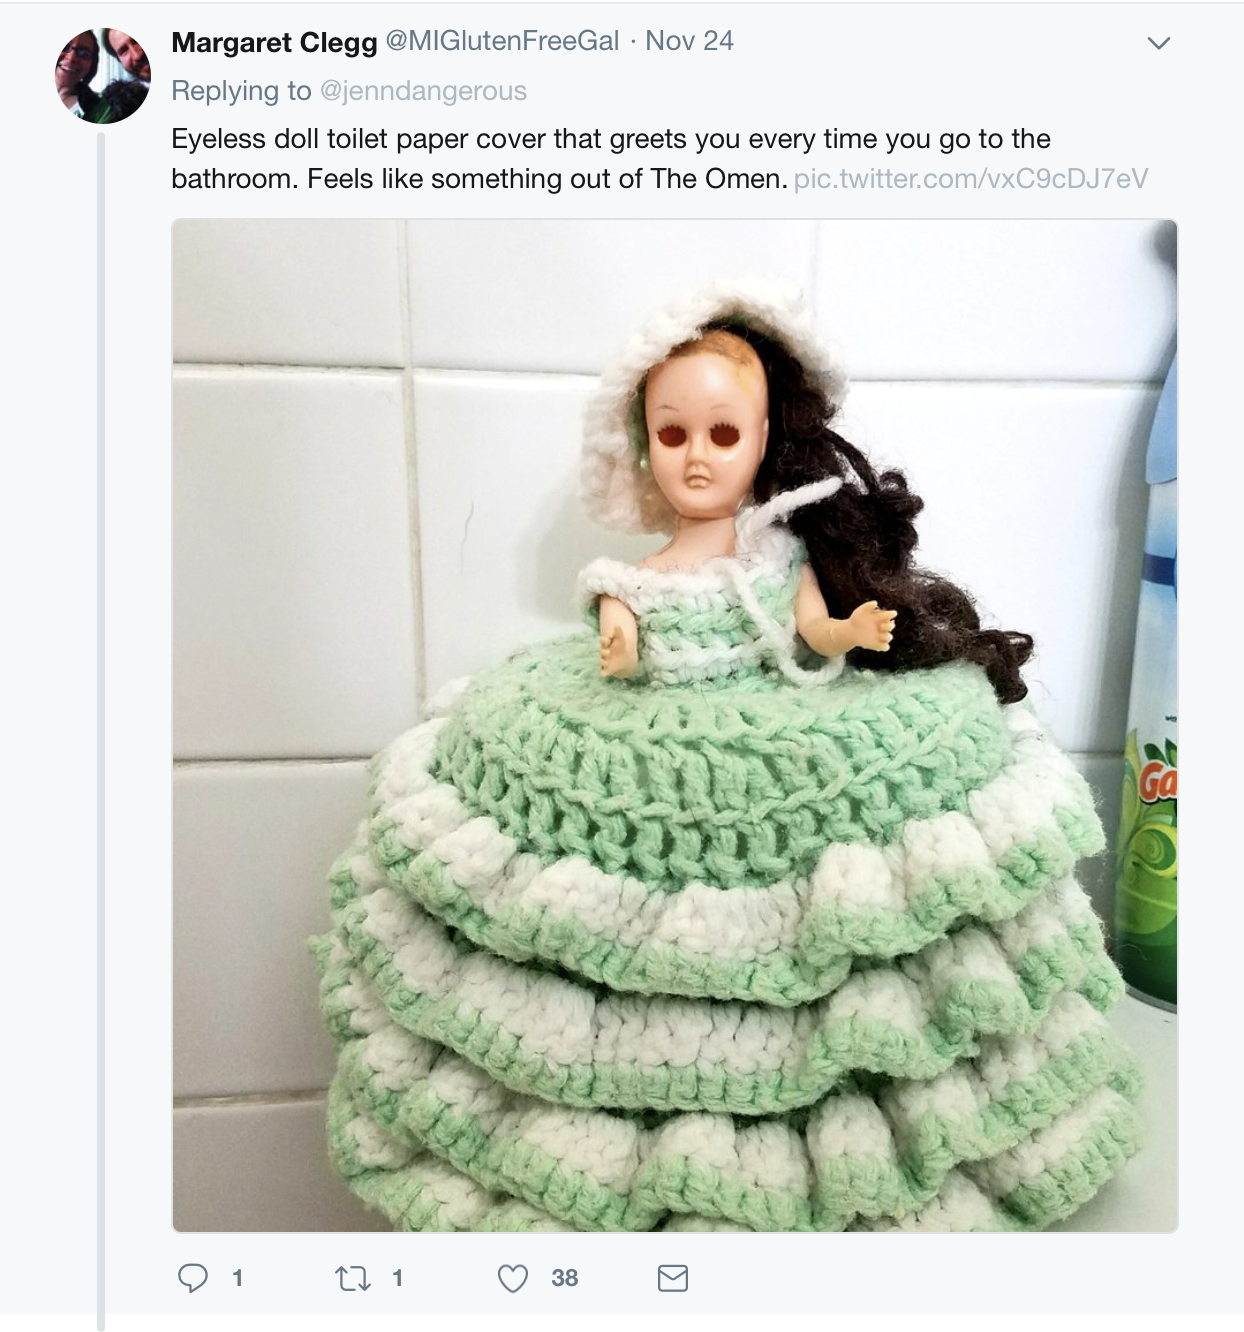 crochet - Margaret Clegg FreeGal Nov 24 endangerous Eyeless doll toilet paper cover that greets you every time you go to the bathroom. Feels something out of The Omen.pic.twitter.comVxCBCD7eV